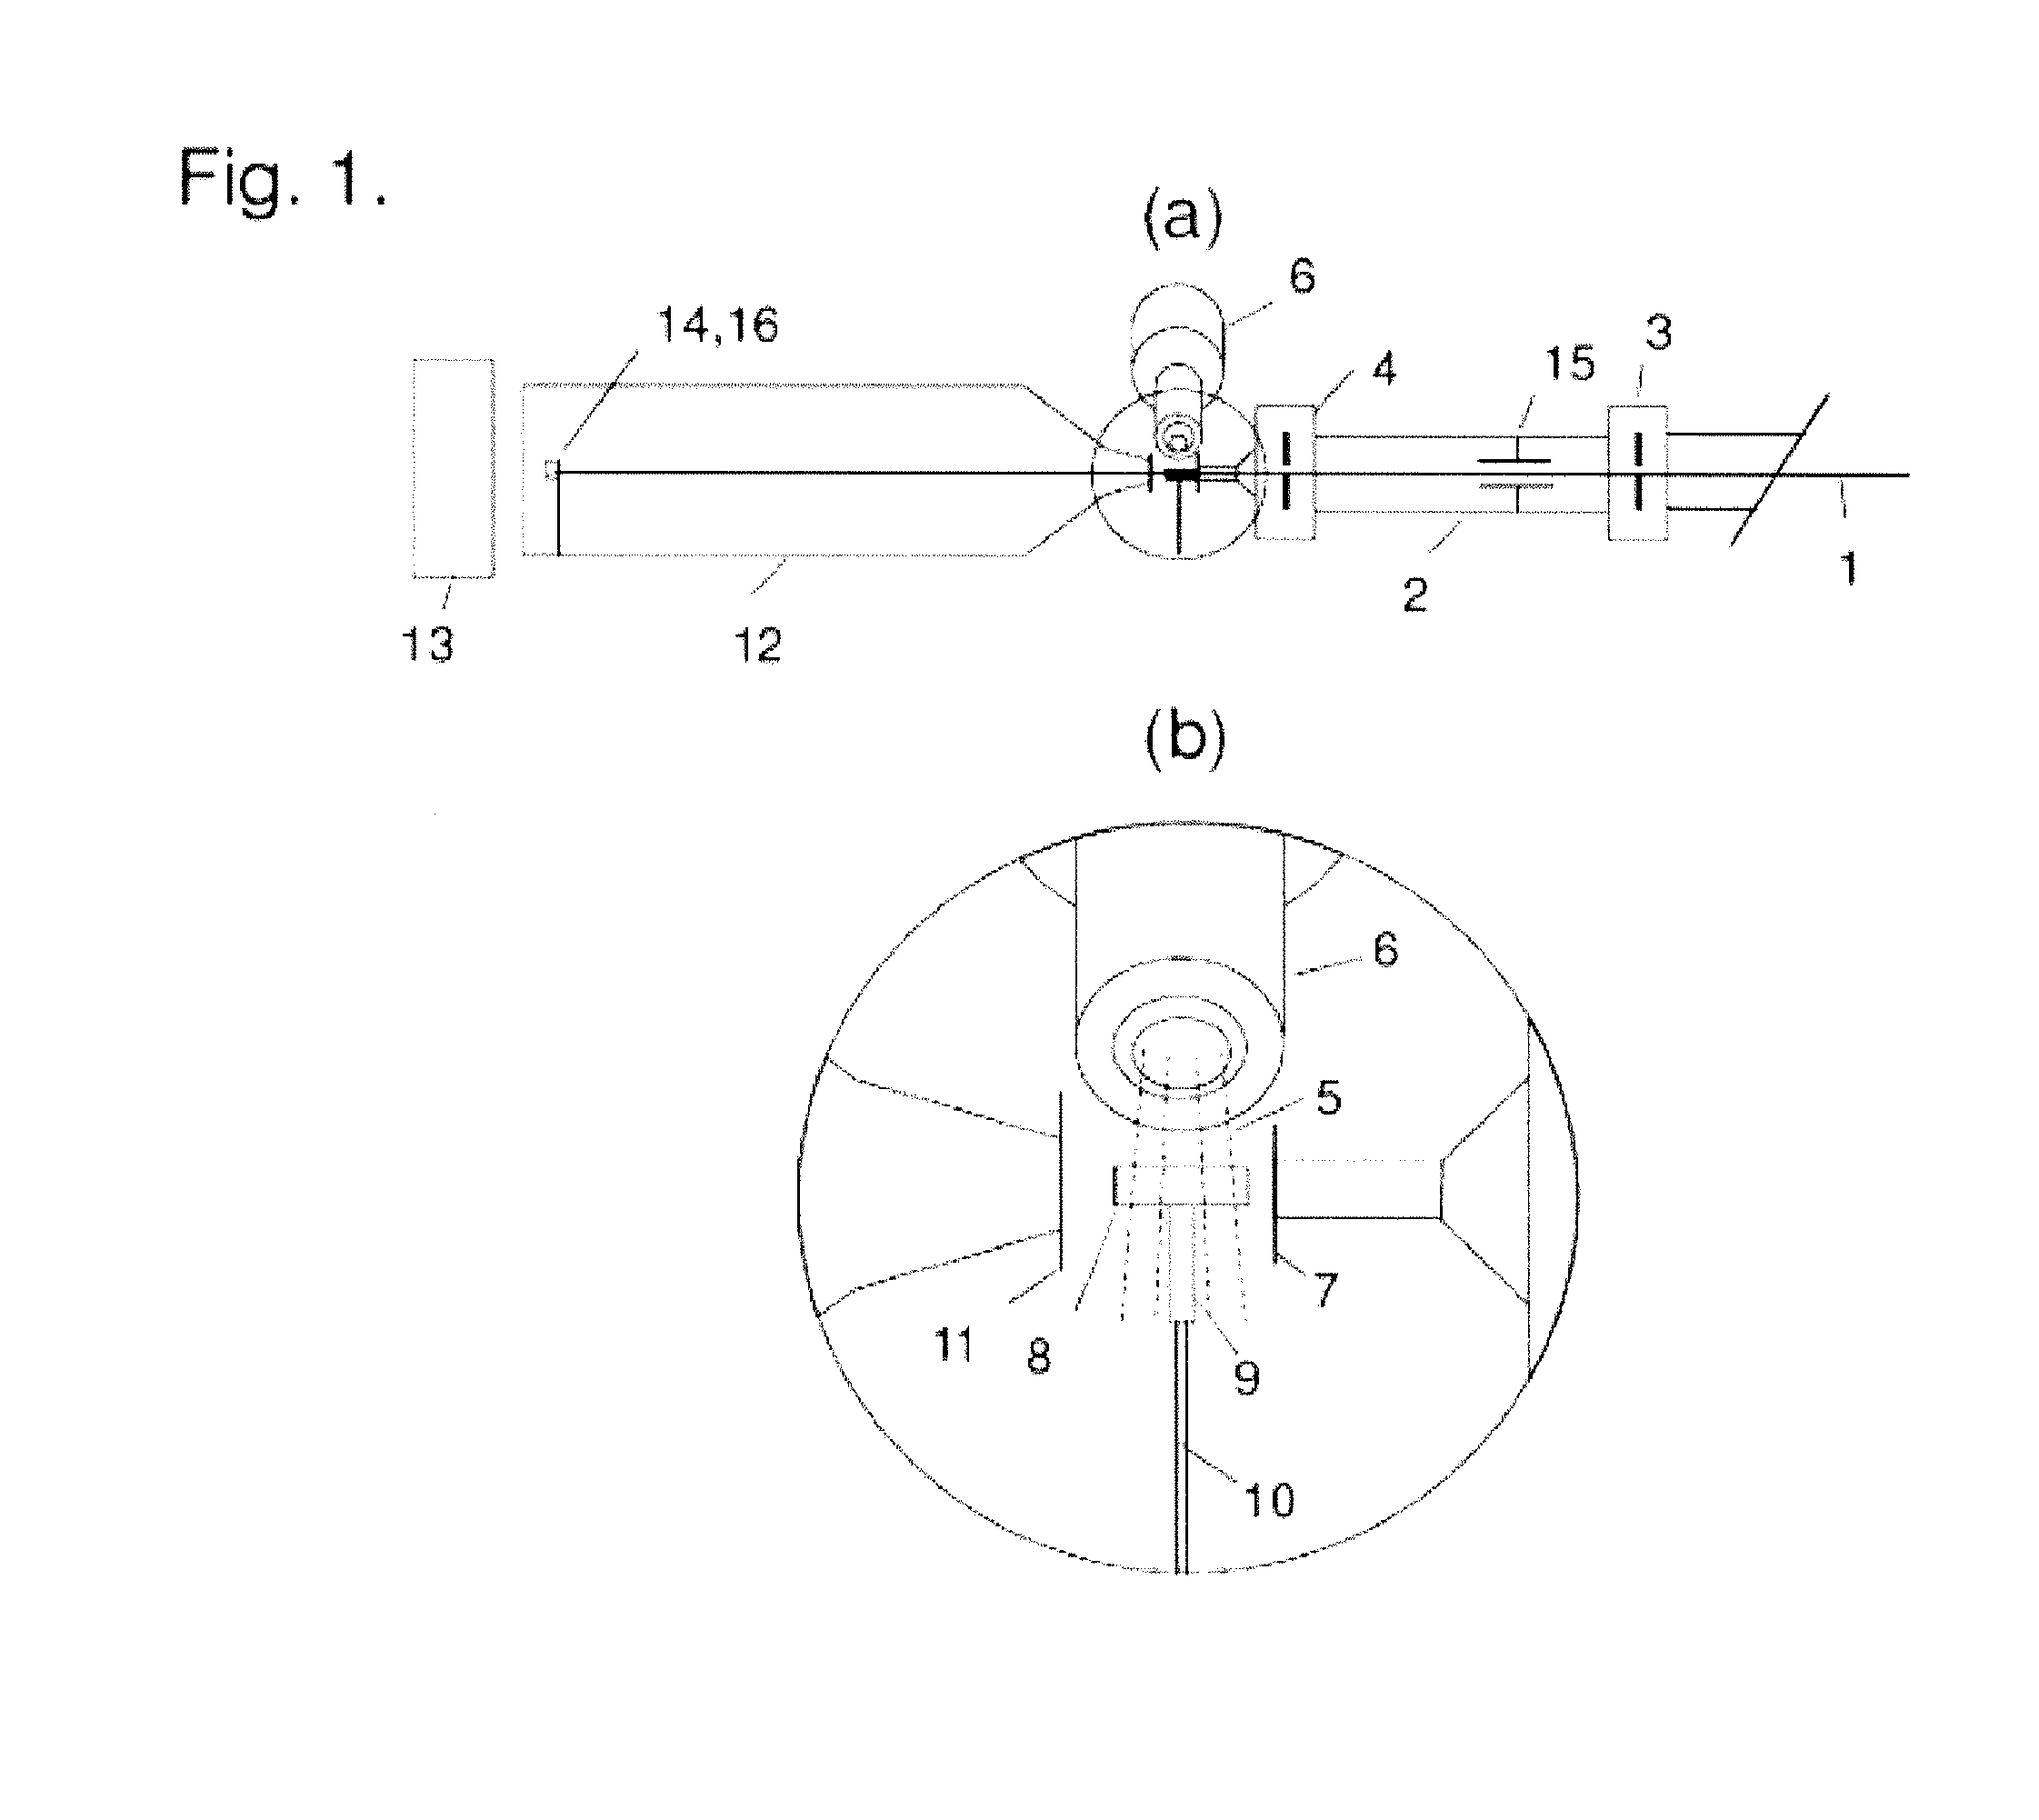 Apparatus and methods for low temperature small angle x-ray scattering